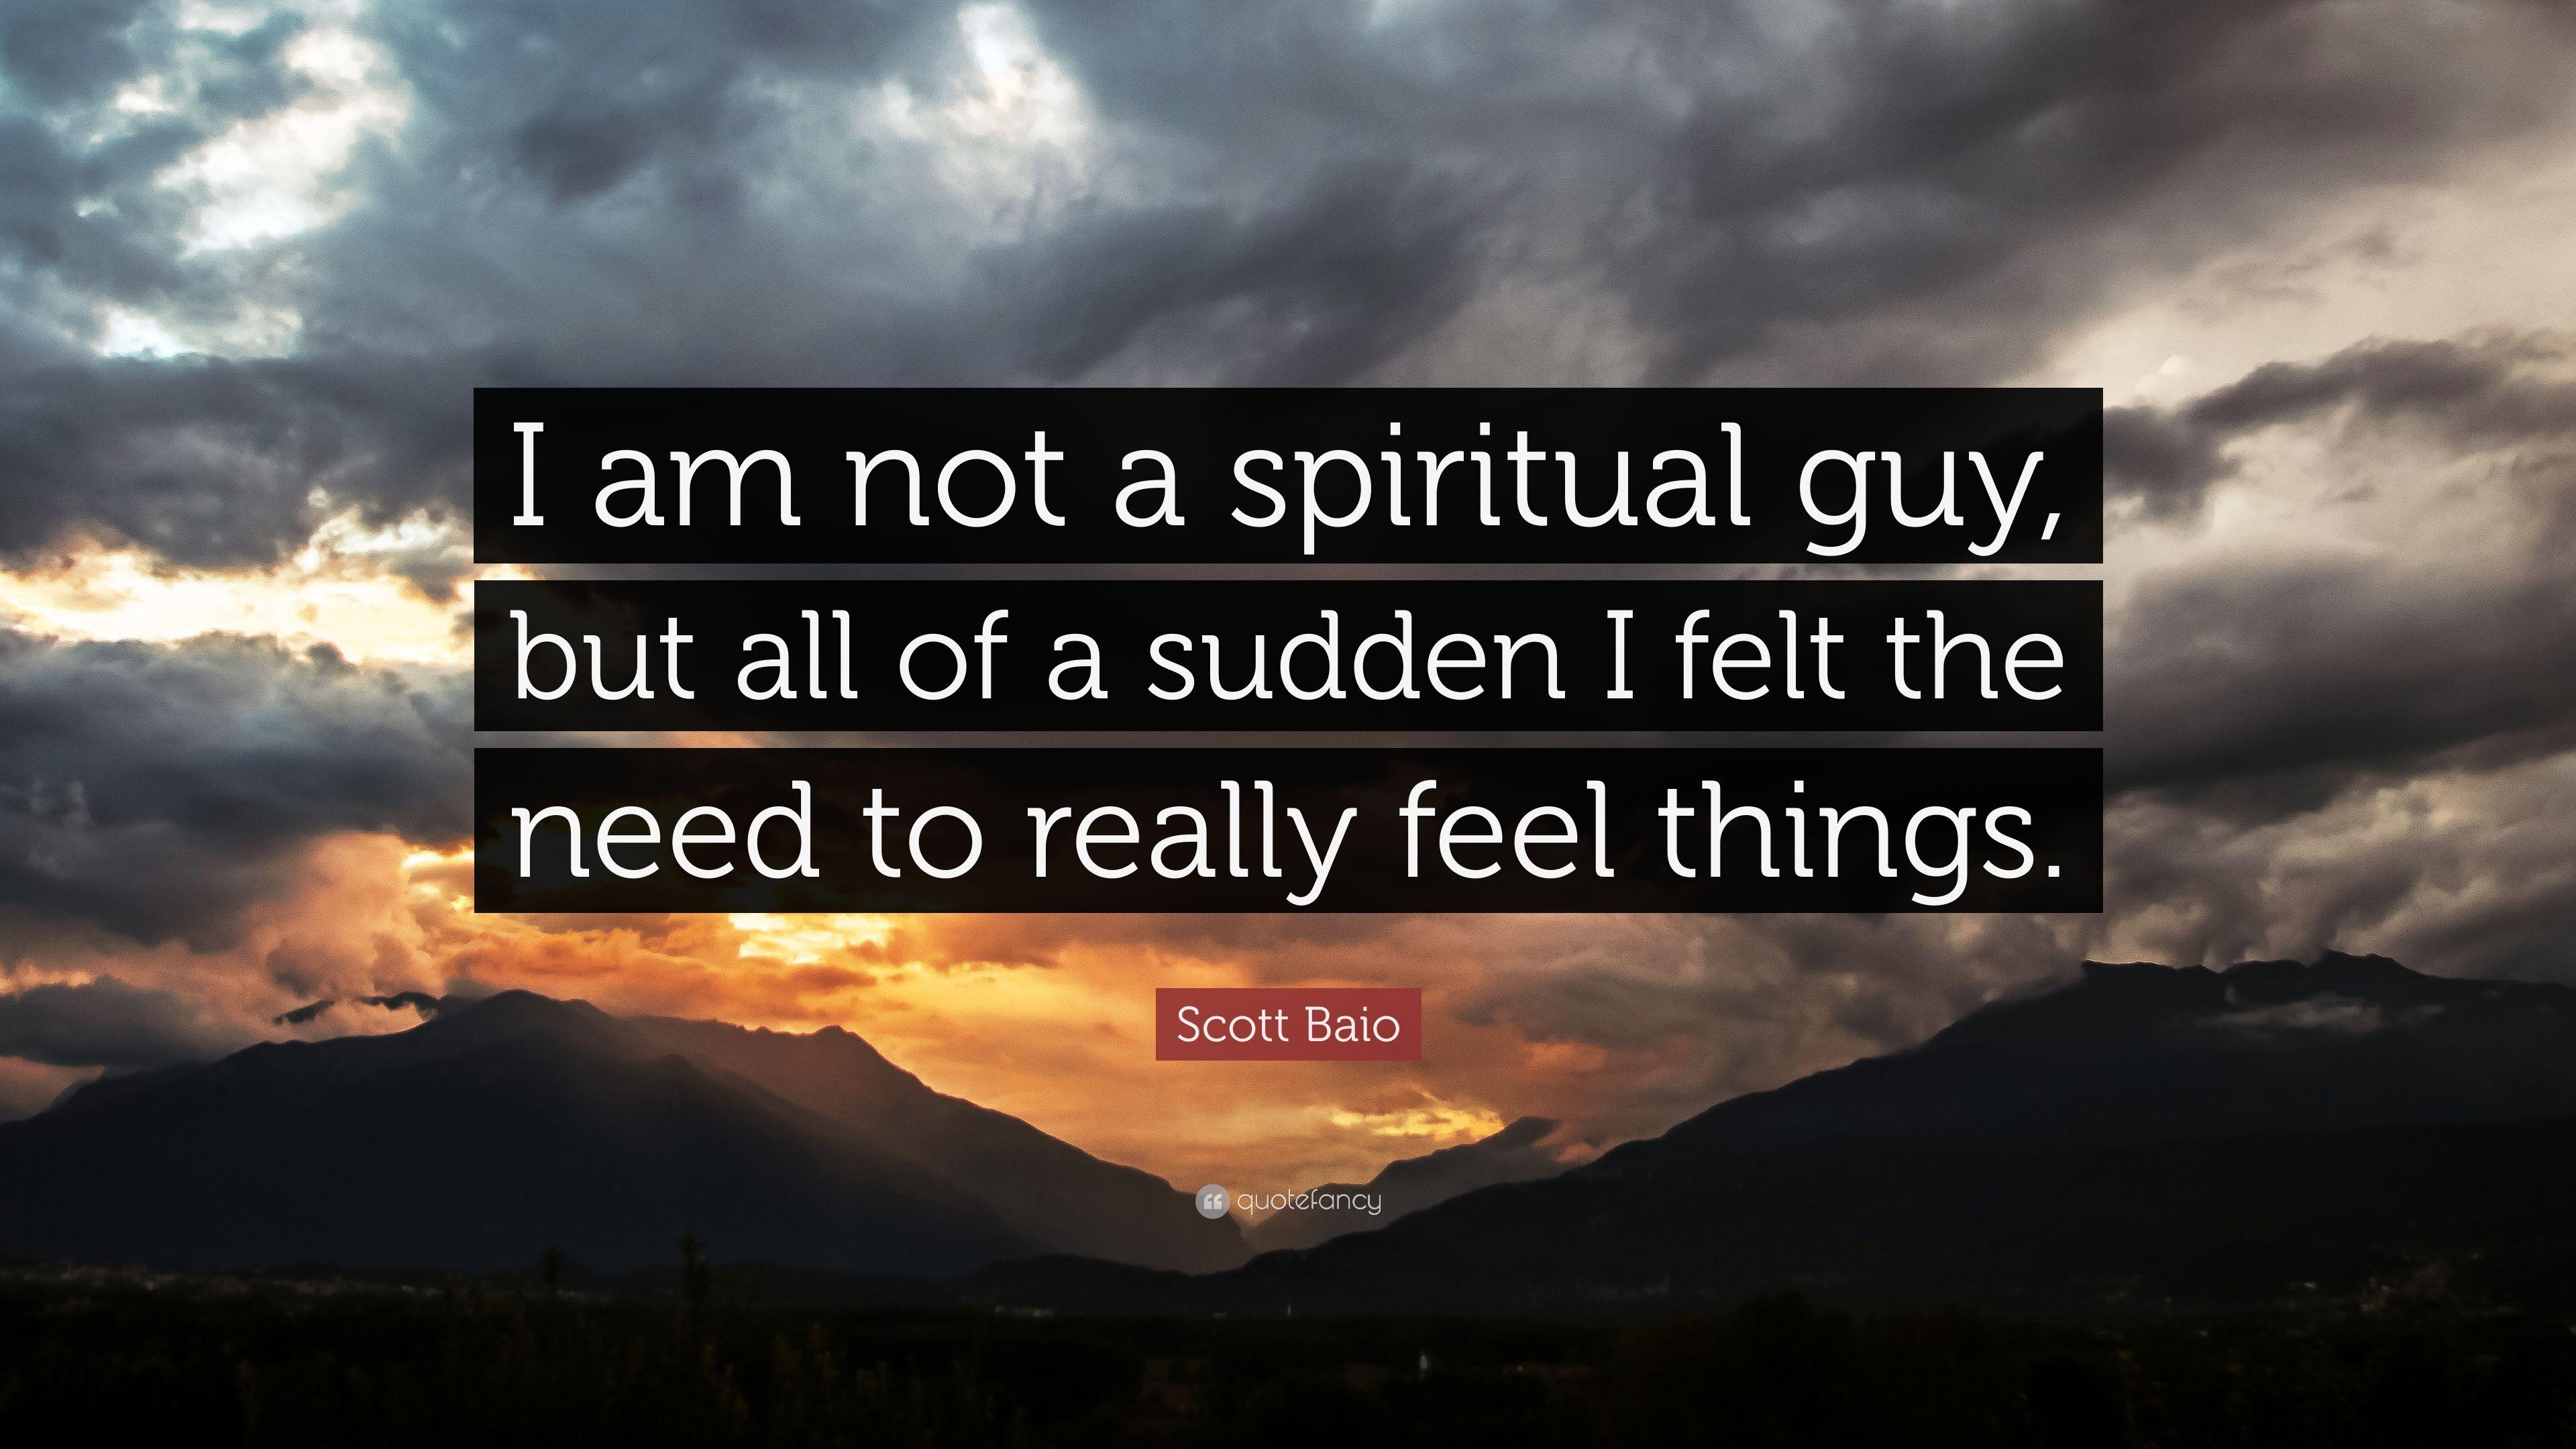 Scott Baio Quote: “I am not a spiritual guy, but all of a sudden I